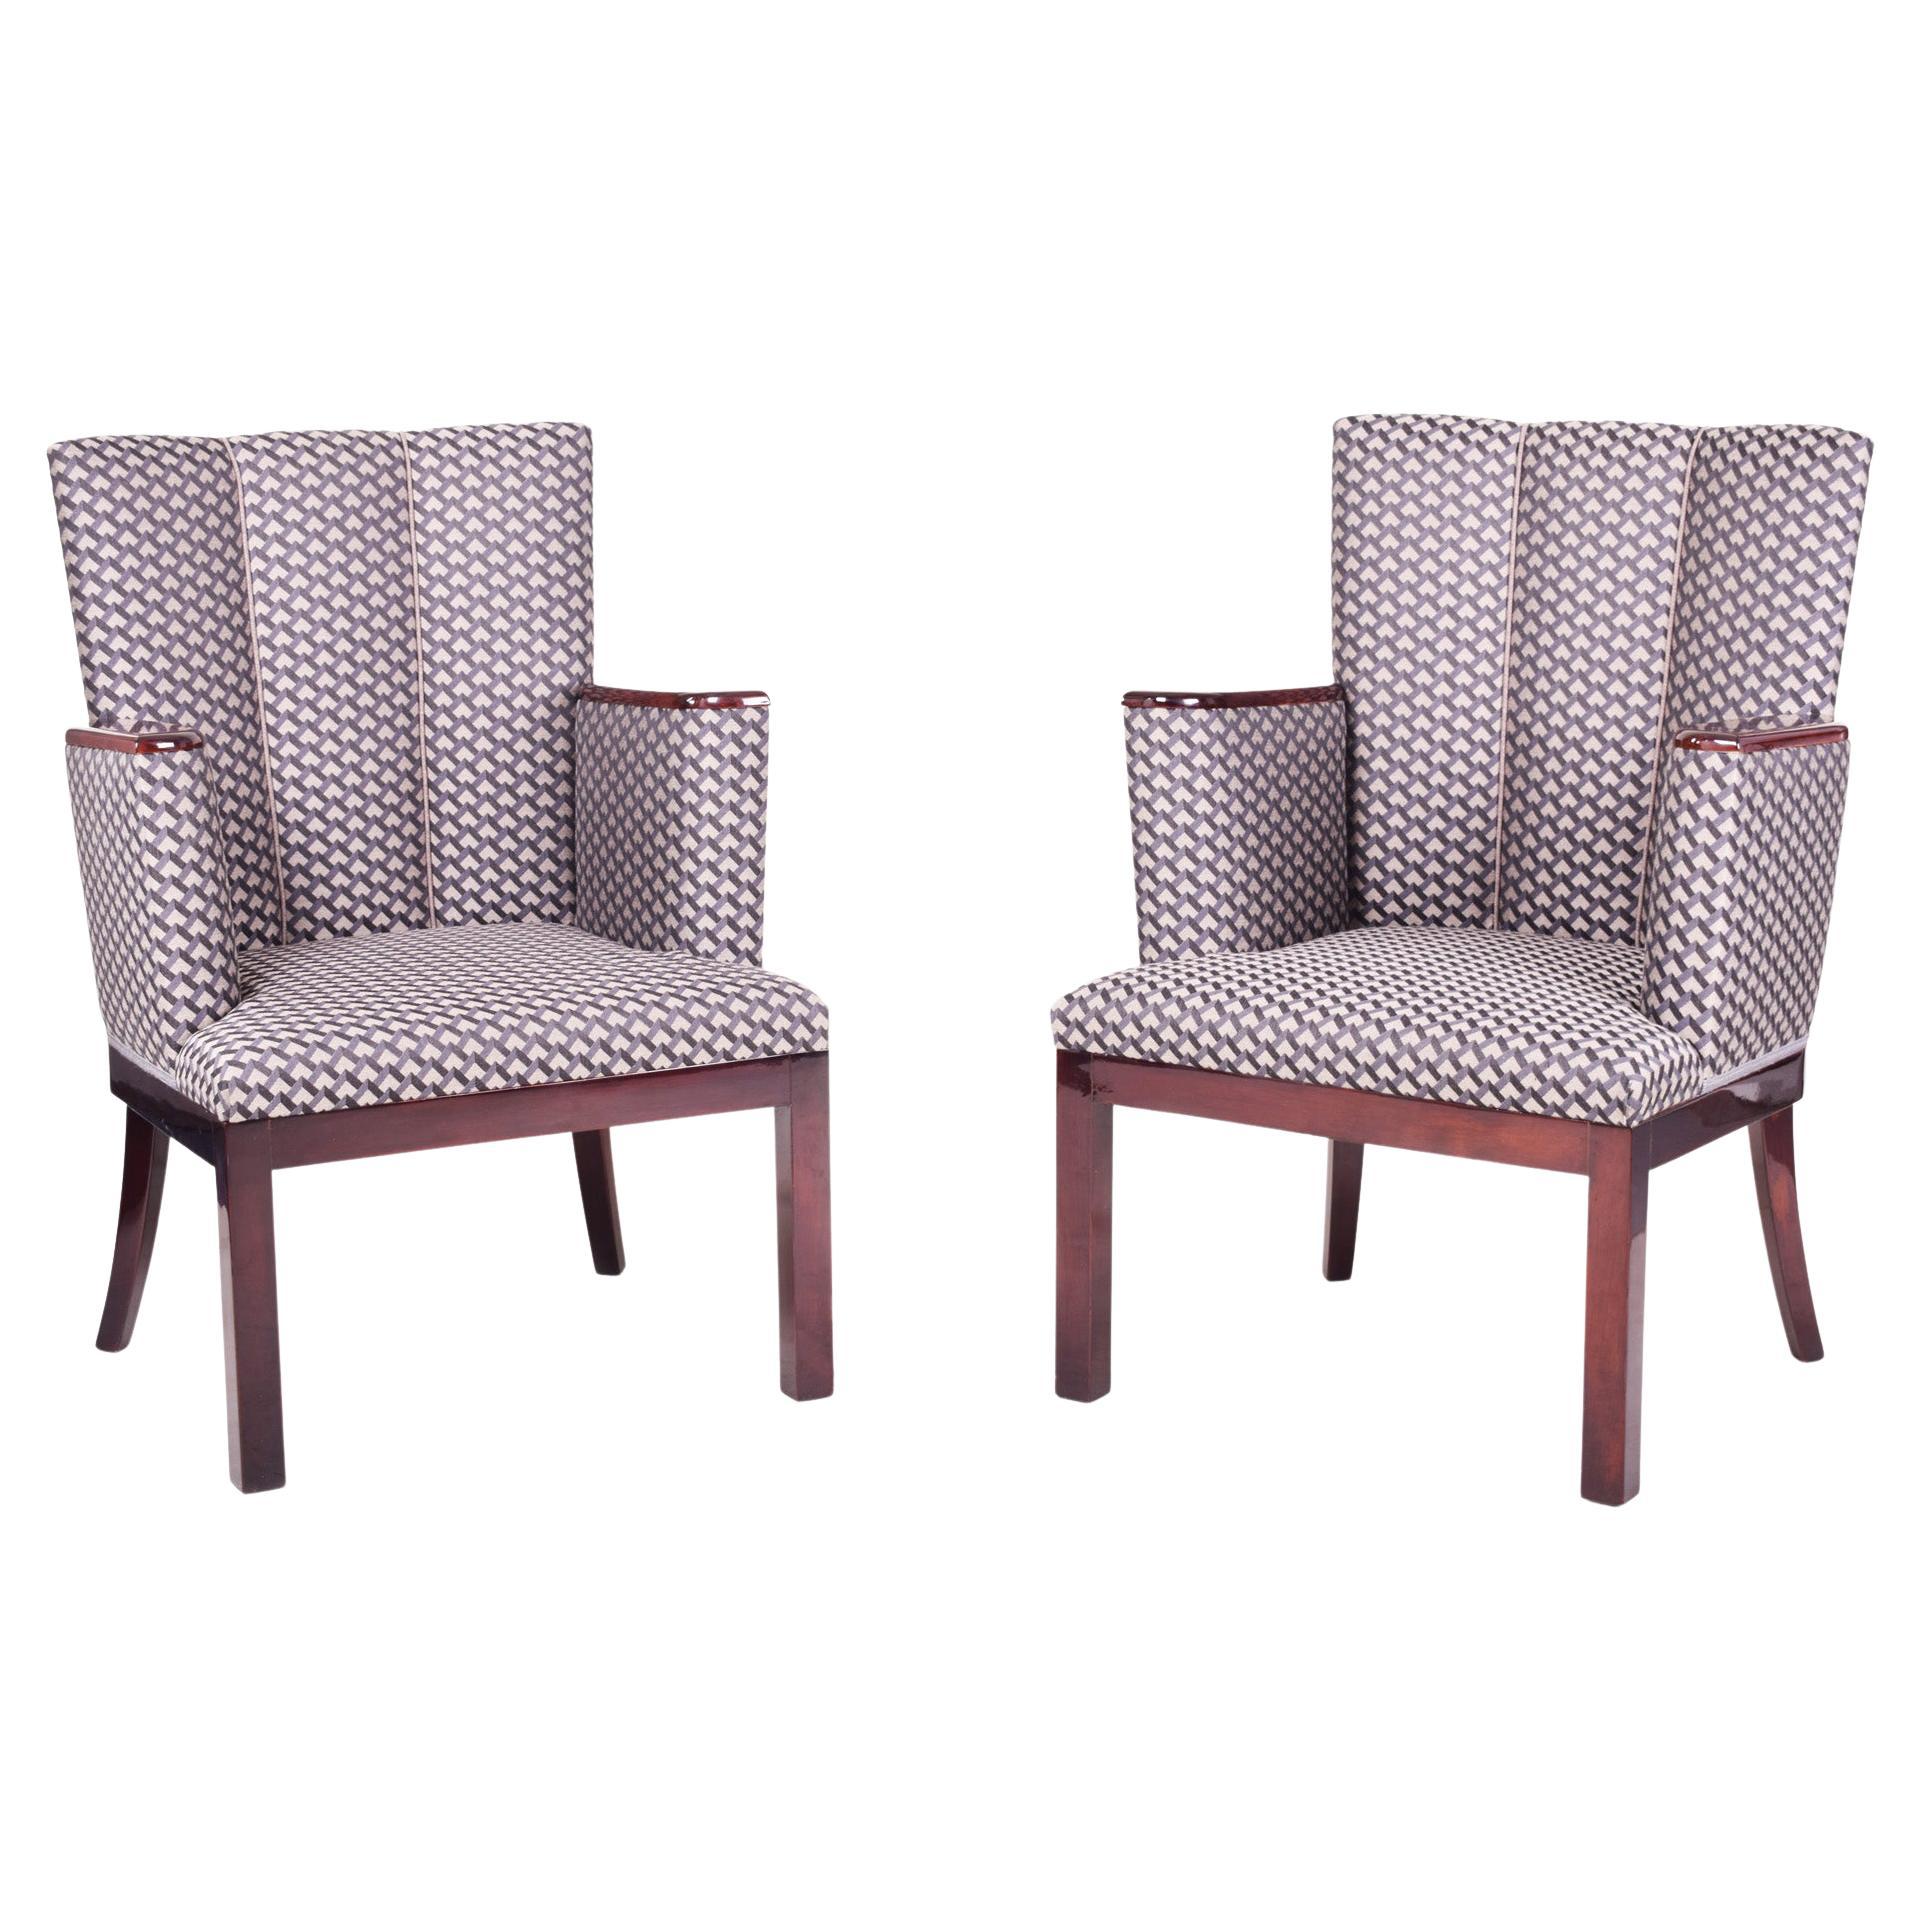 Pair of Mahogany Art Deco Armchairs, Made in France, Fully Restored, 1920-1929